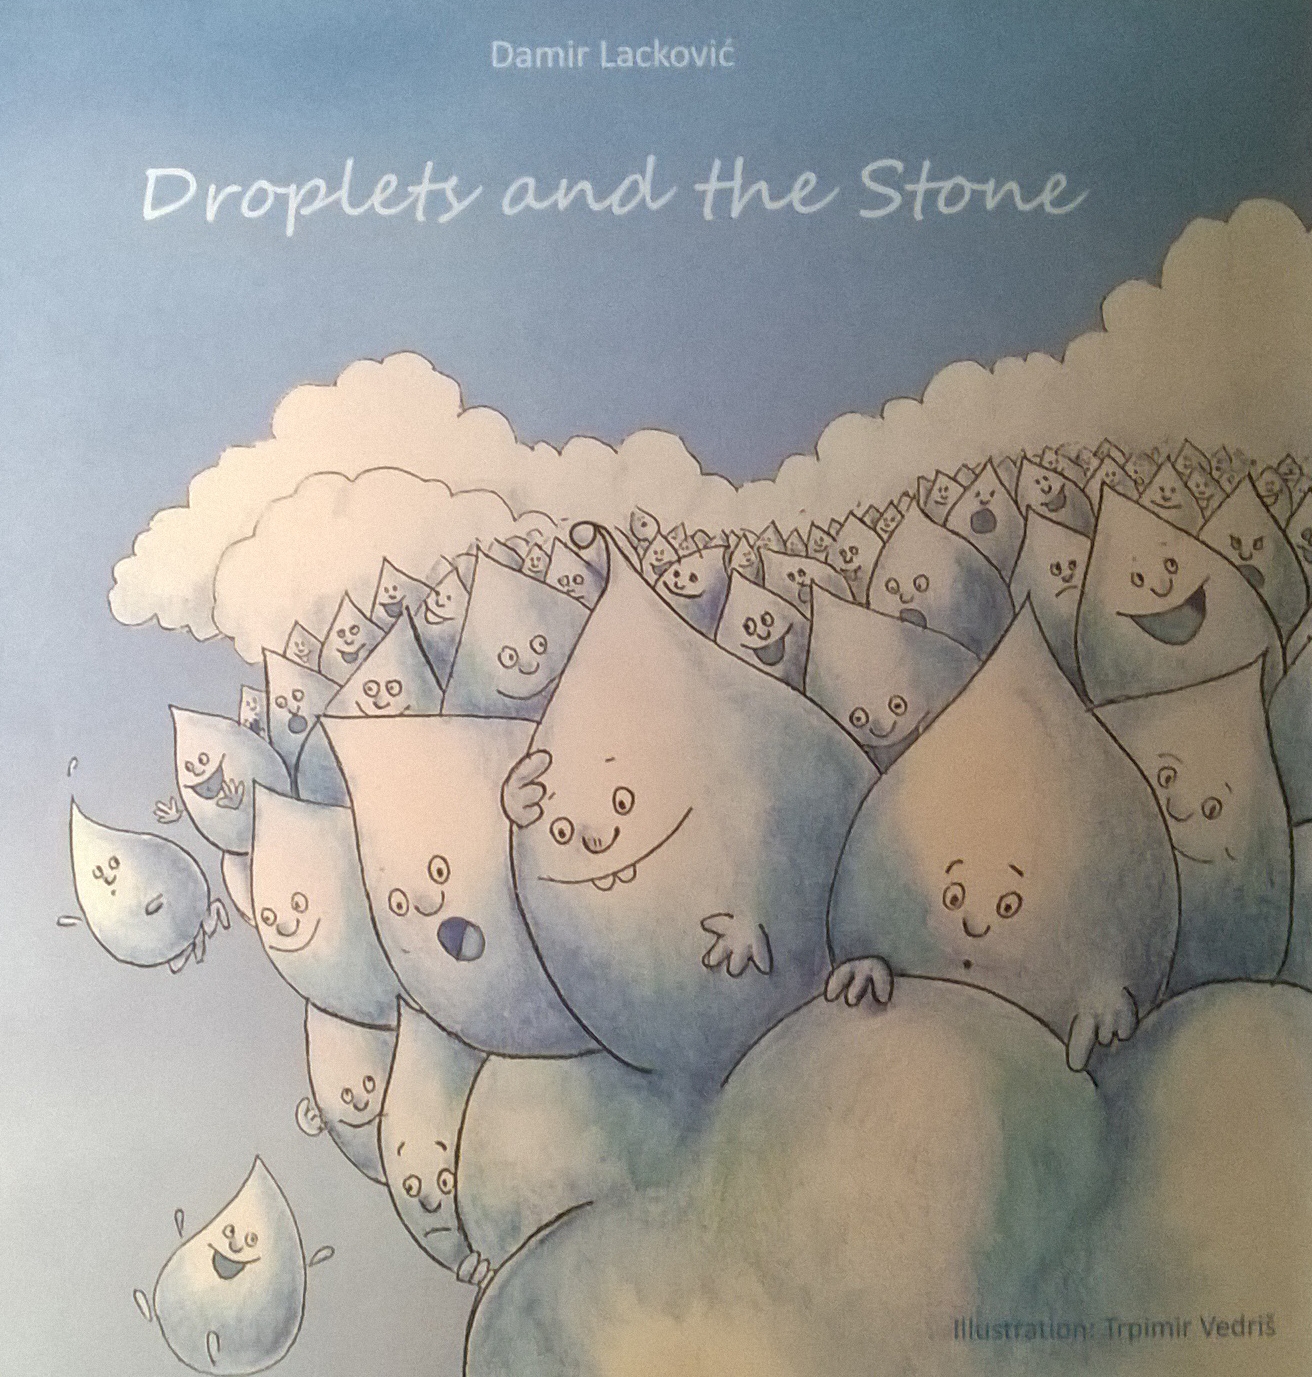 Droplets and the Stone